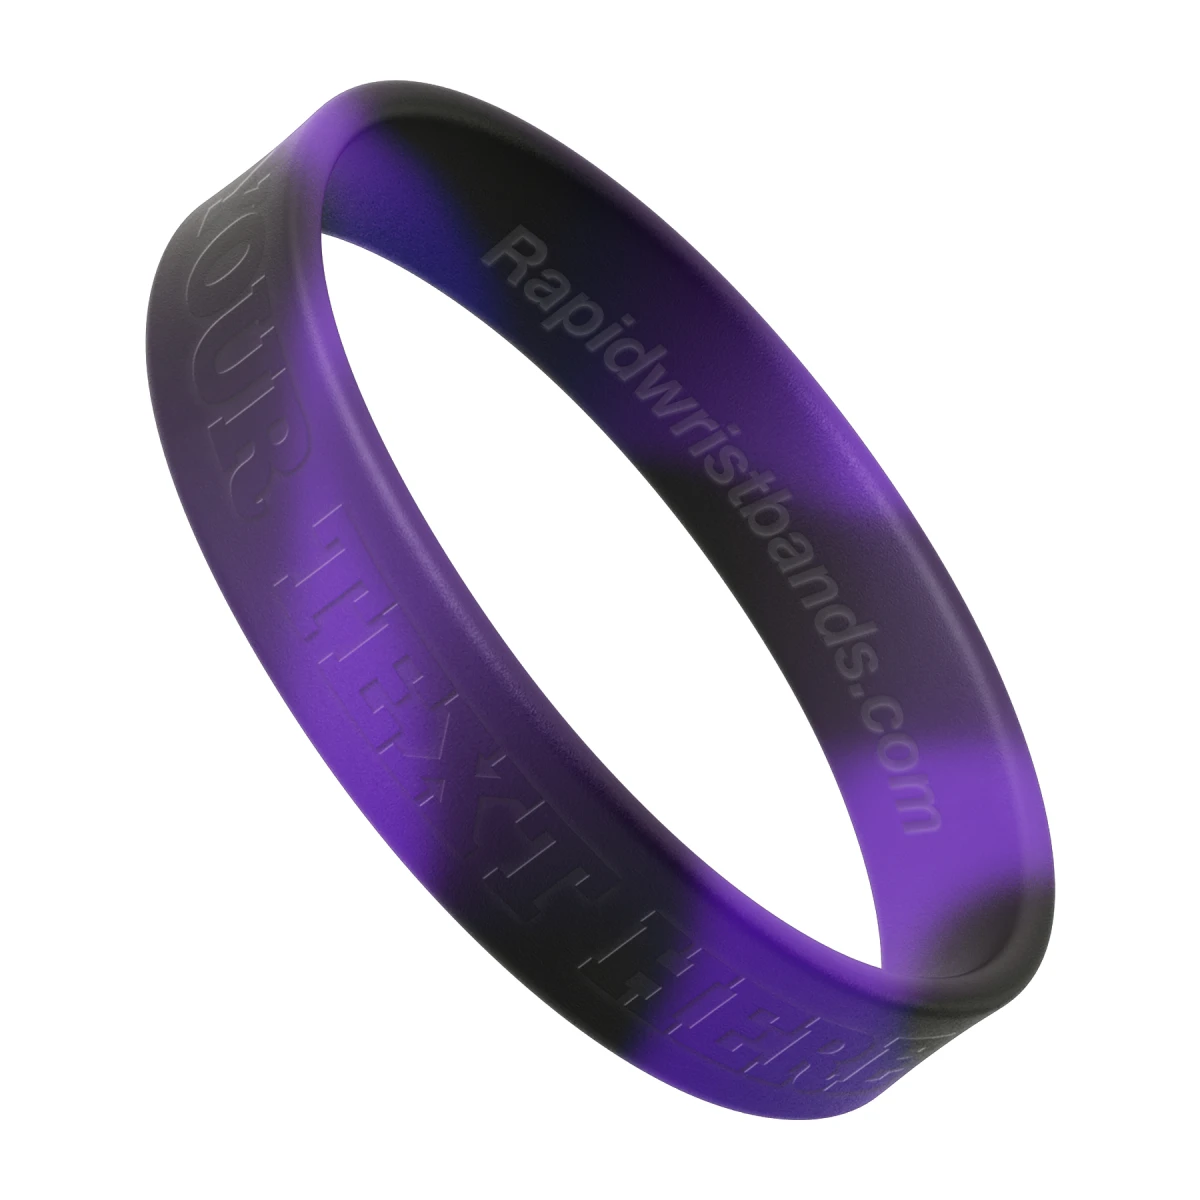 Swirl Black/Purple Wristband With Your Text Here Embossed